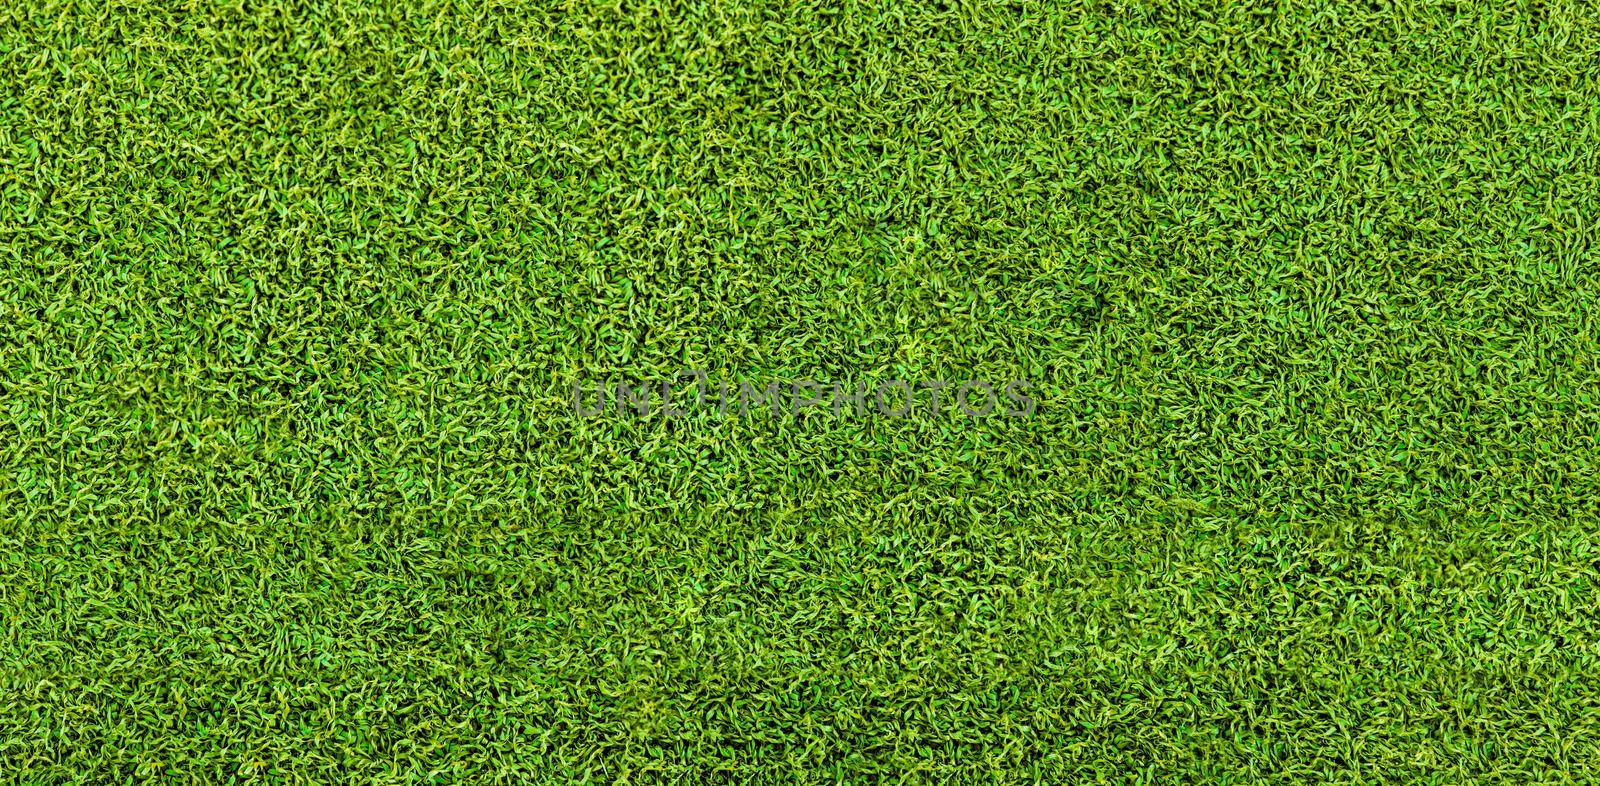 Green grass texture background. Artificial green grass. Top view of bright grass background. Idea concept used for making green backdrop, lawn for a training football pitch, Grass Golf Courses green lawn pattern textured background.